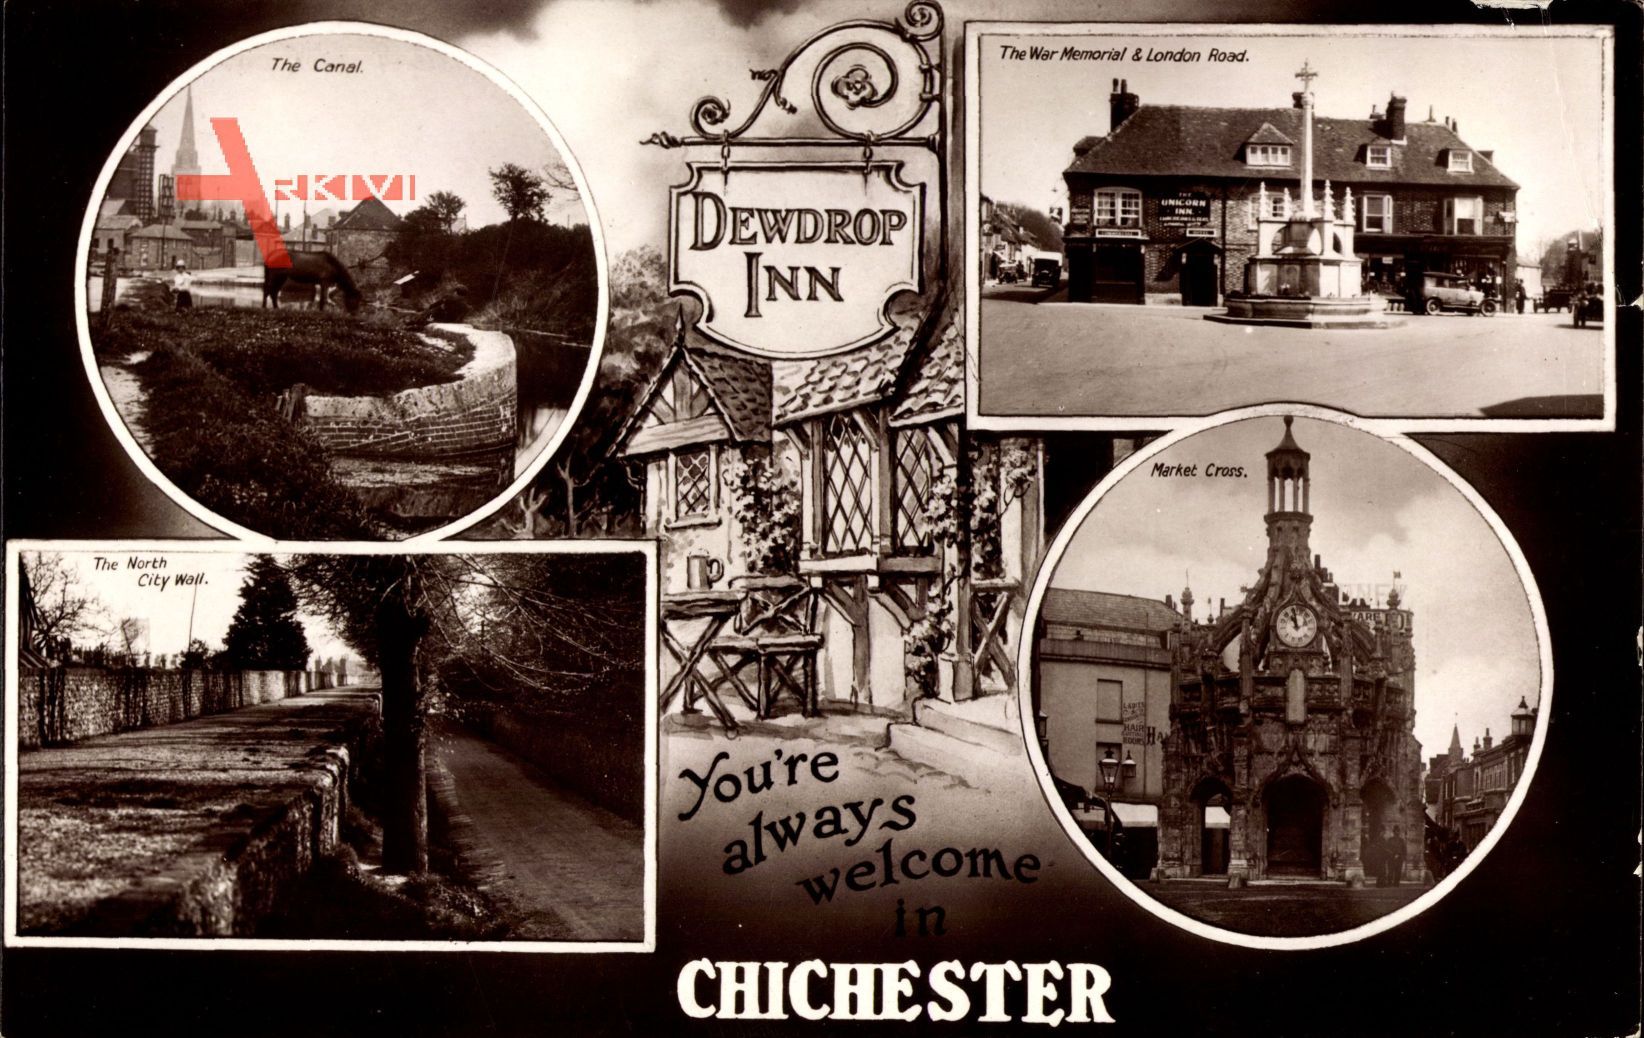 Chichester South East, Dewdropt Inn, Canal, London Road, Memorial